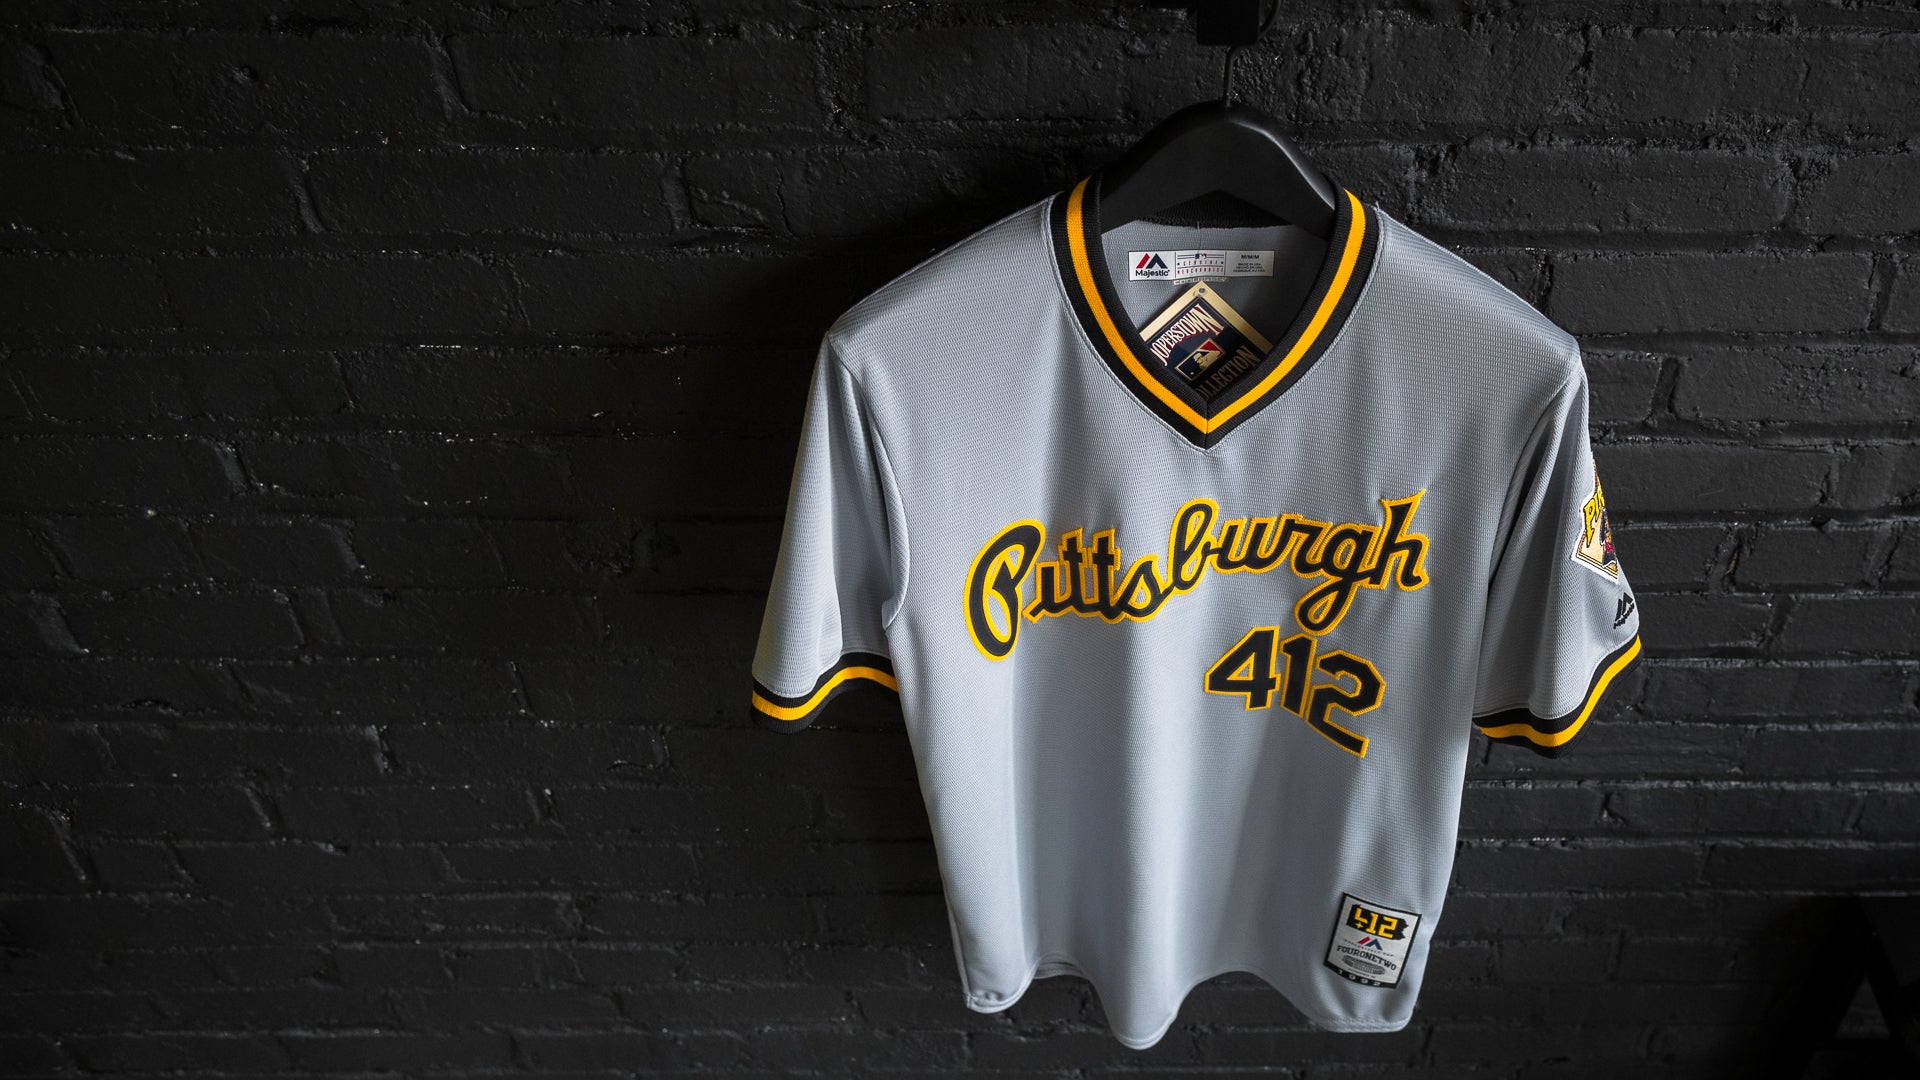 MLB is back! Gear up and save 25% on a Pittsburgh Pirates jersey